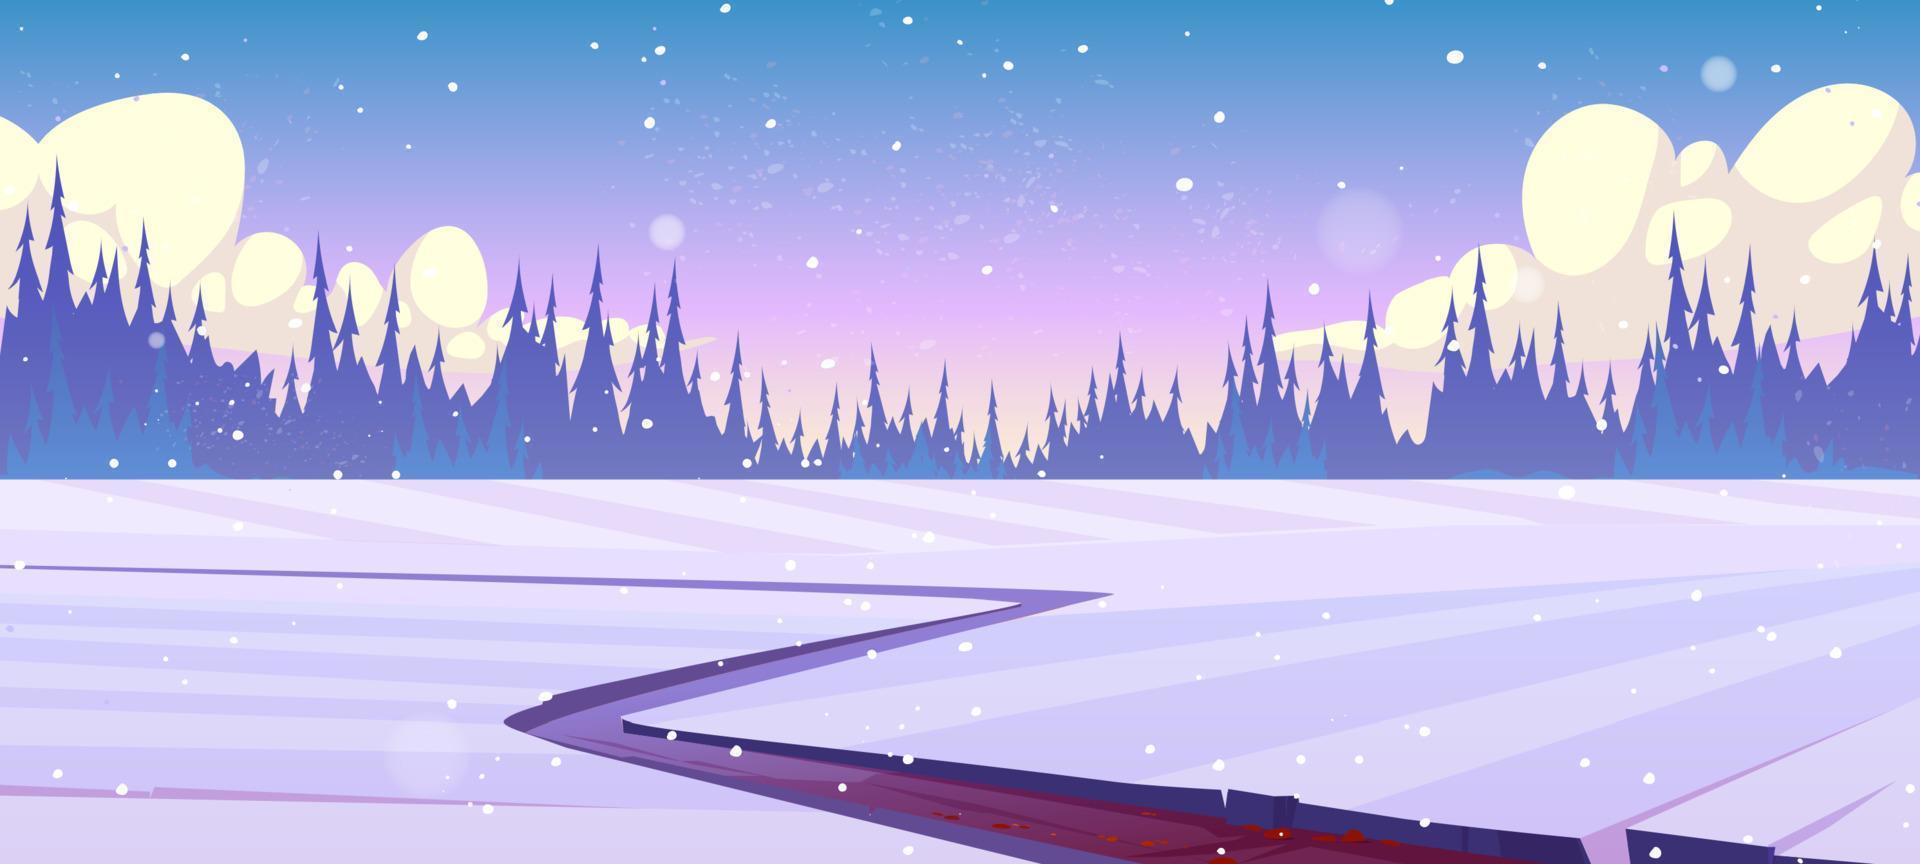 Winter landscape with snow, road and forest vector